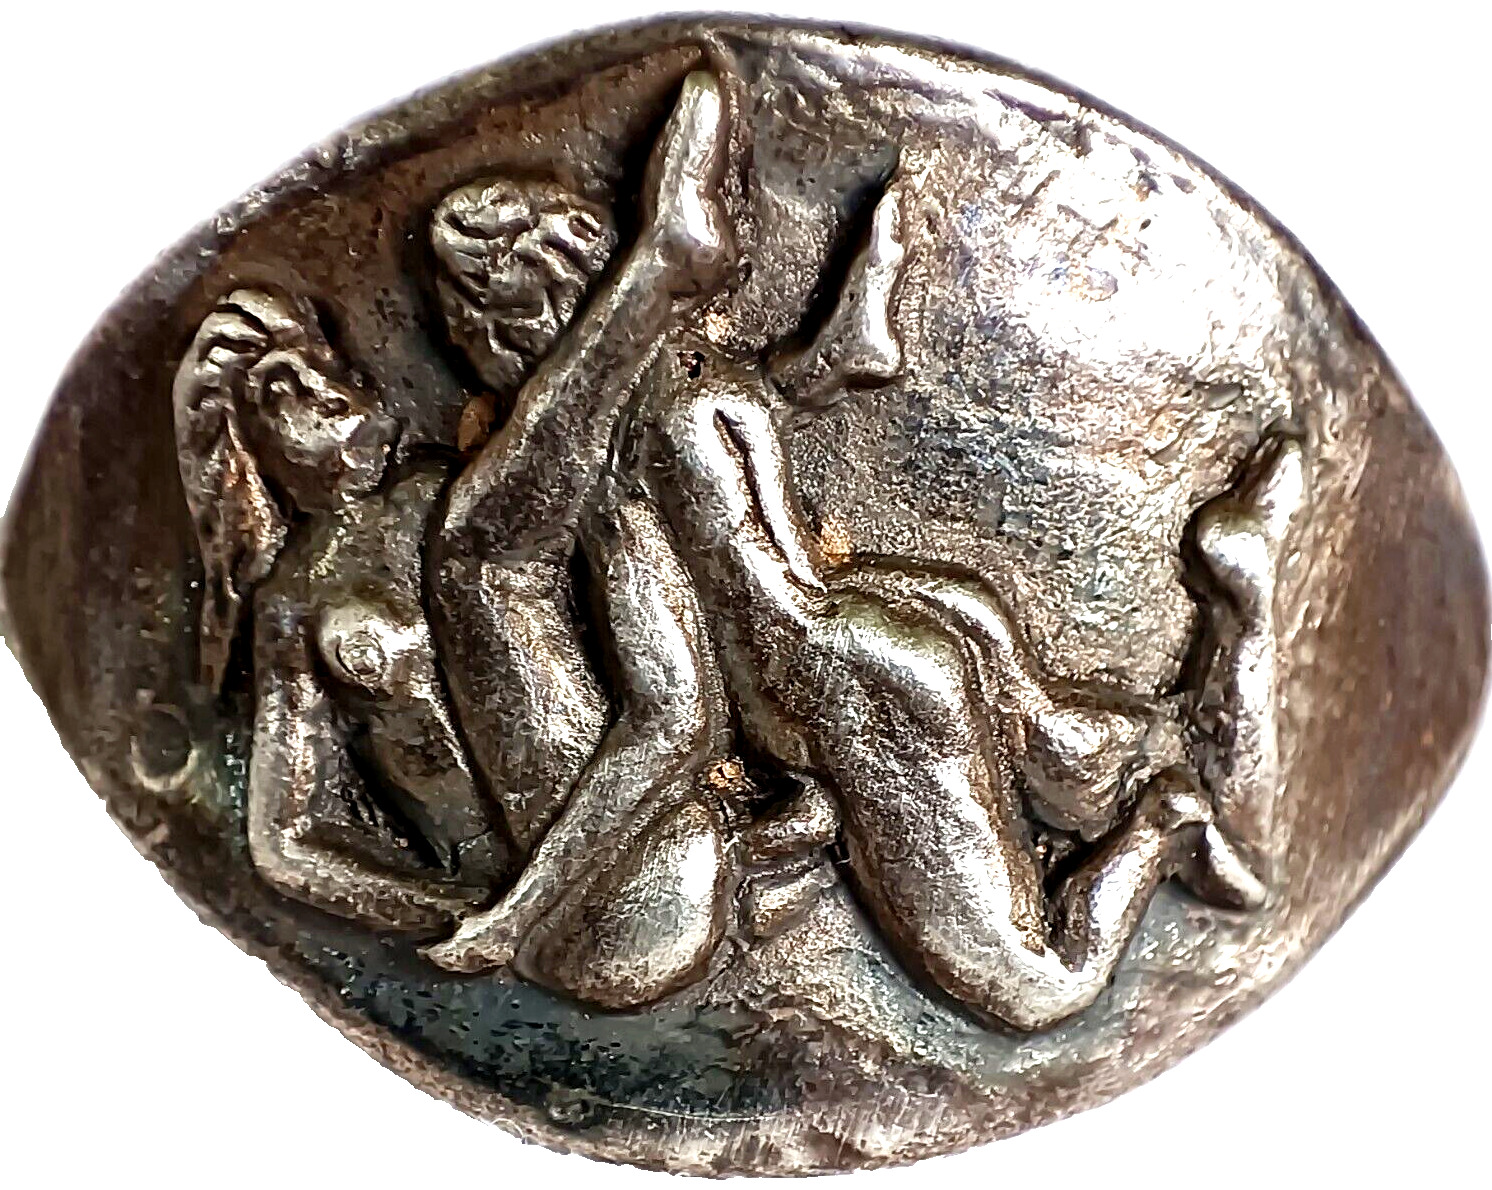 200 BC Ancient Fine Roman Erotic Silver Ring Museum Quality Artifact Wearable